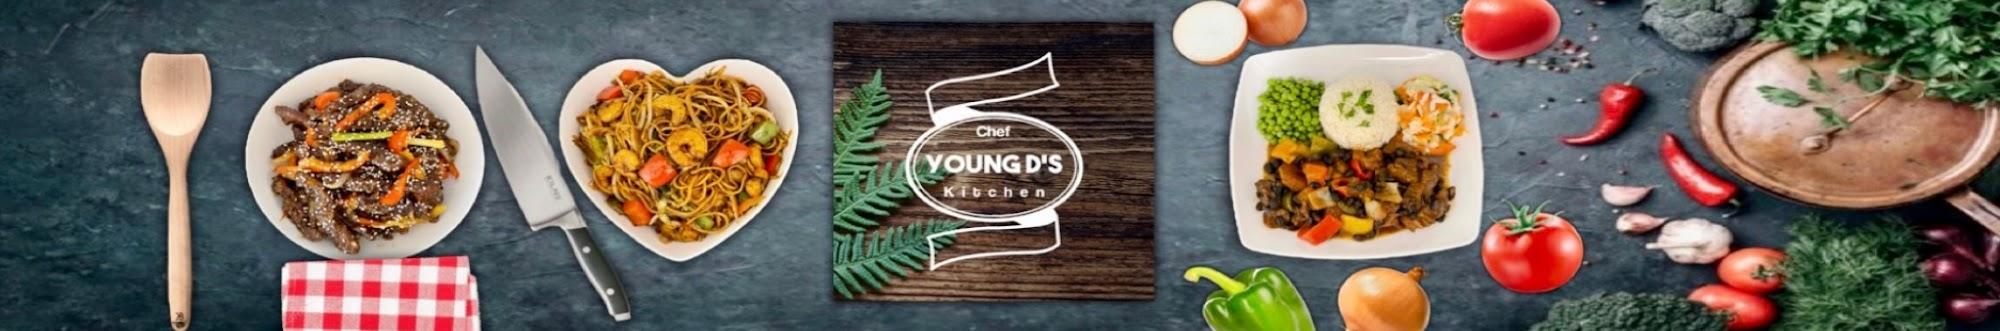 Chef Young Media